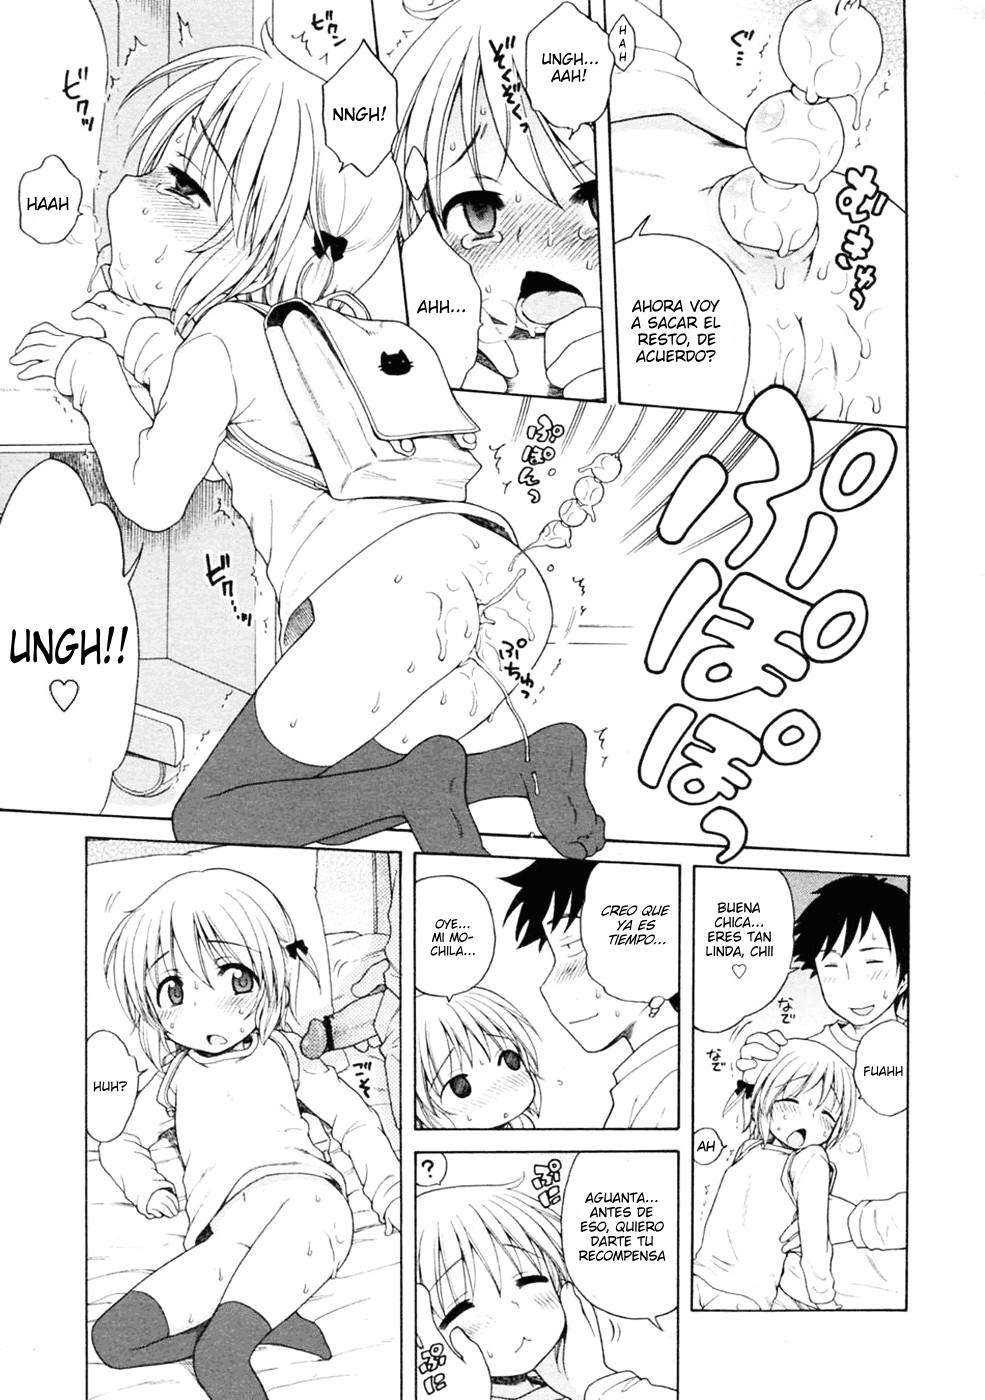 Me gustas Onii-chan! Chapter-7 - 14